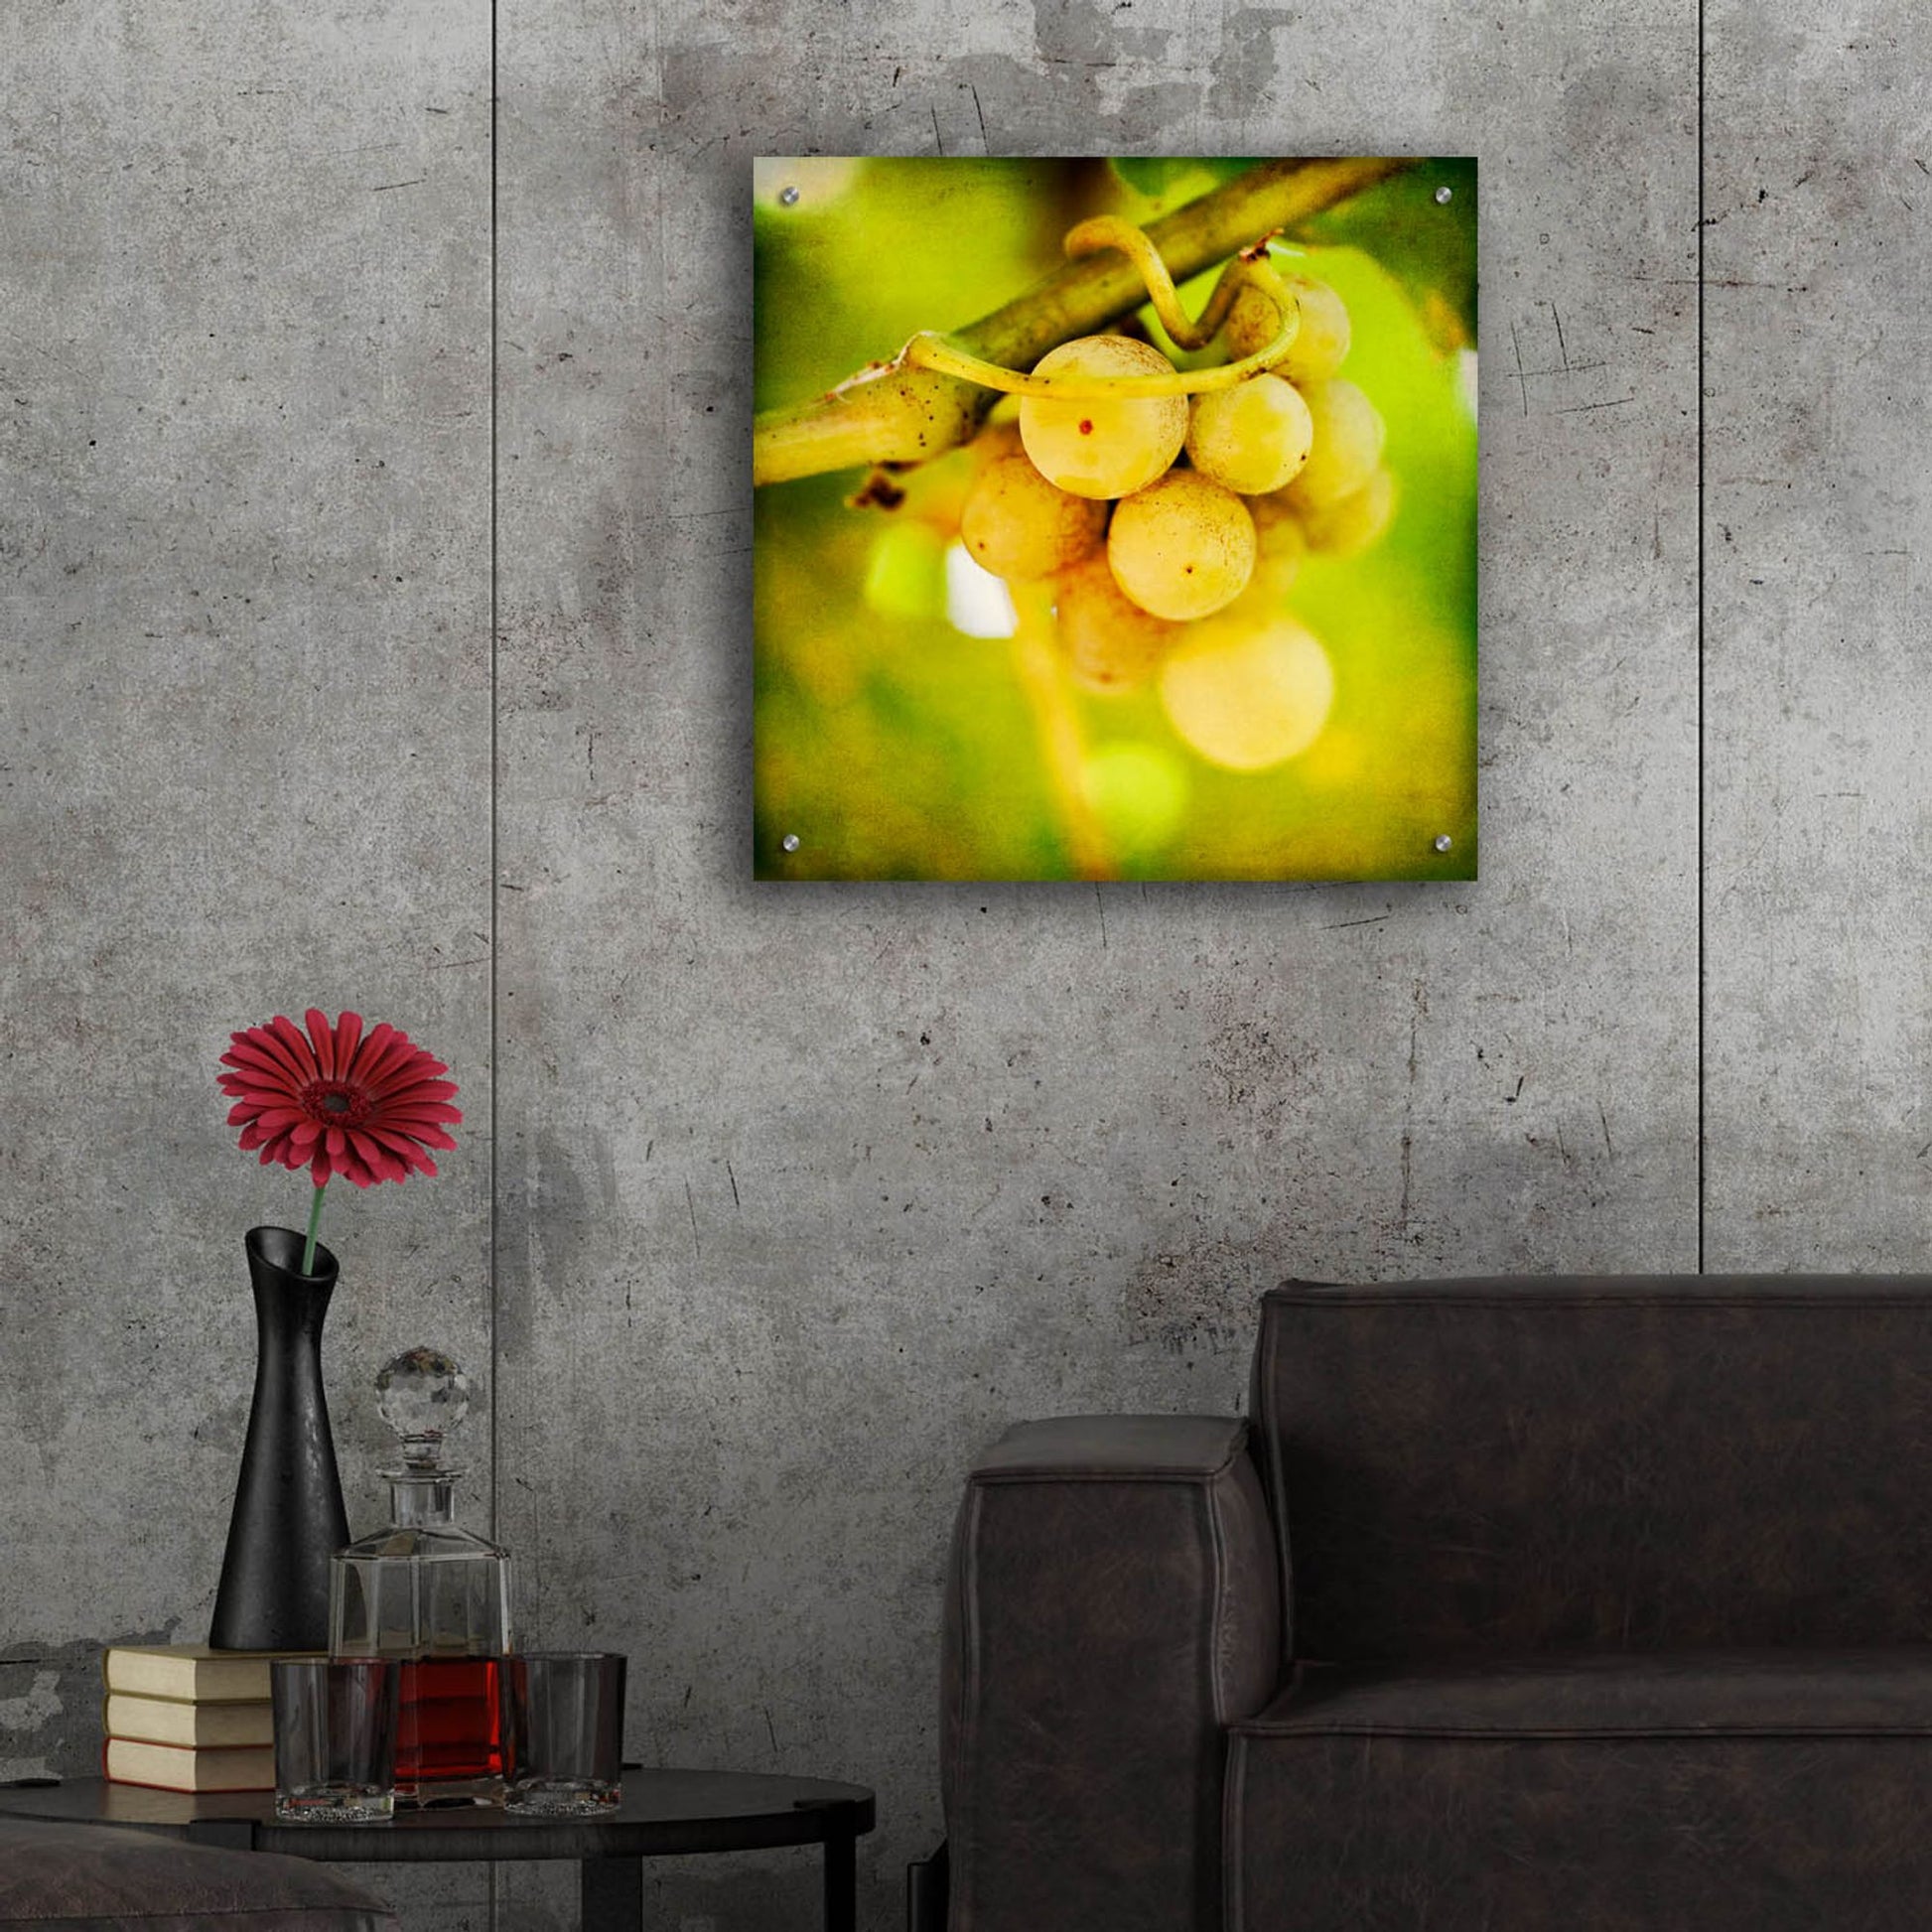 Epic Art 'Spring Fruit' by Jessica Rogers, Acrylic Glass Wall Art,24x24